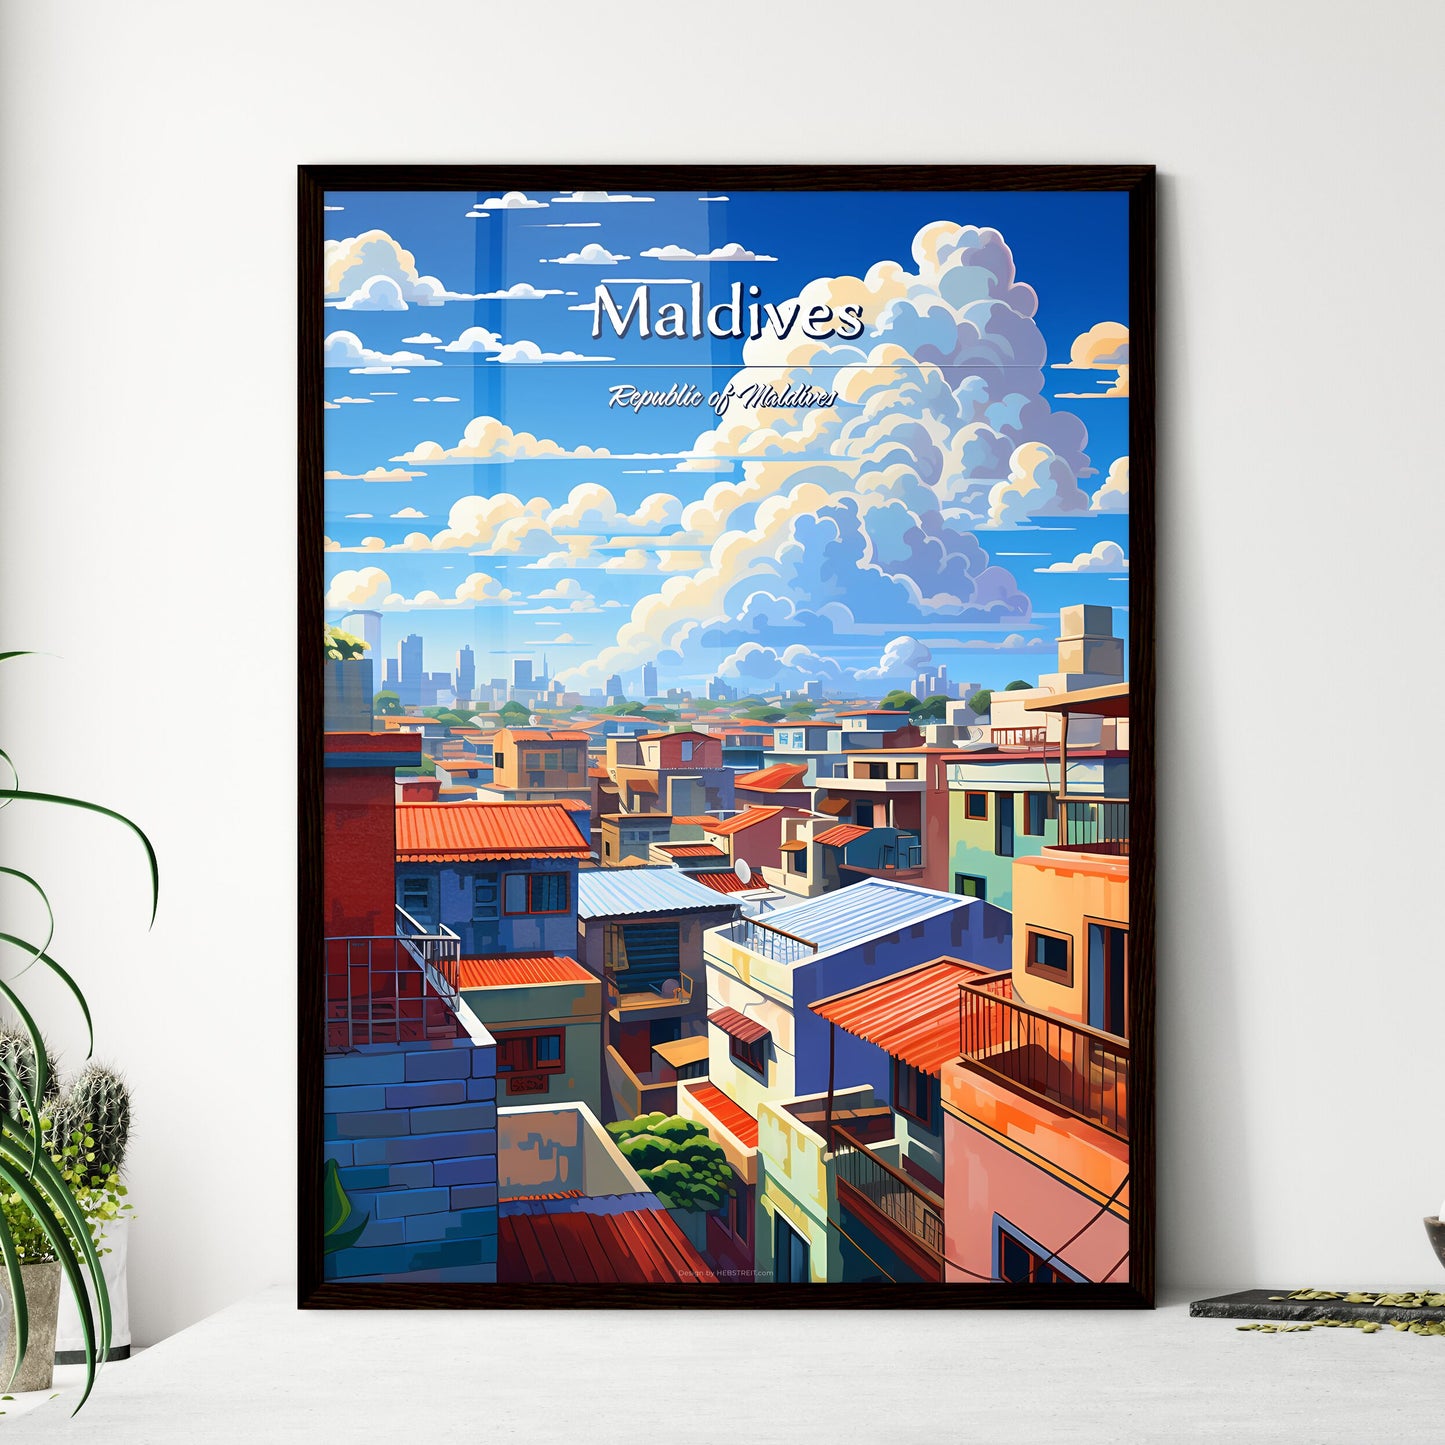 On the roofs of Maldives, Republic of Maldives - Art print of a city with many buildings and clouds in the sky Default Title